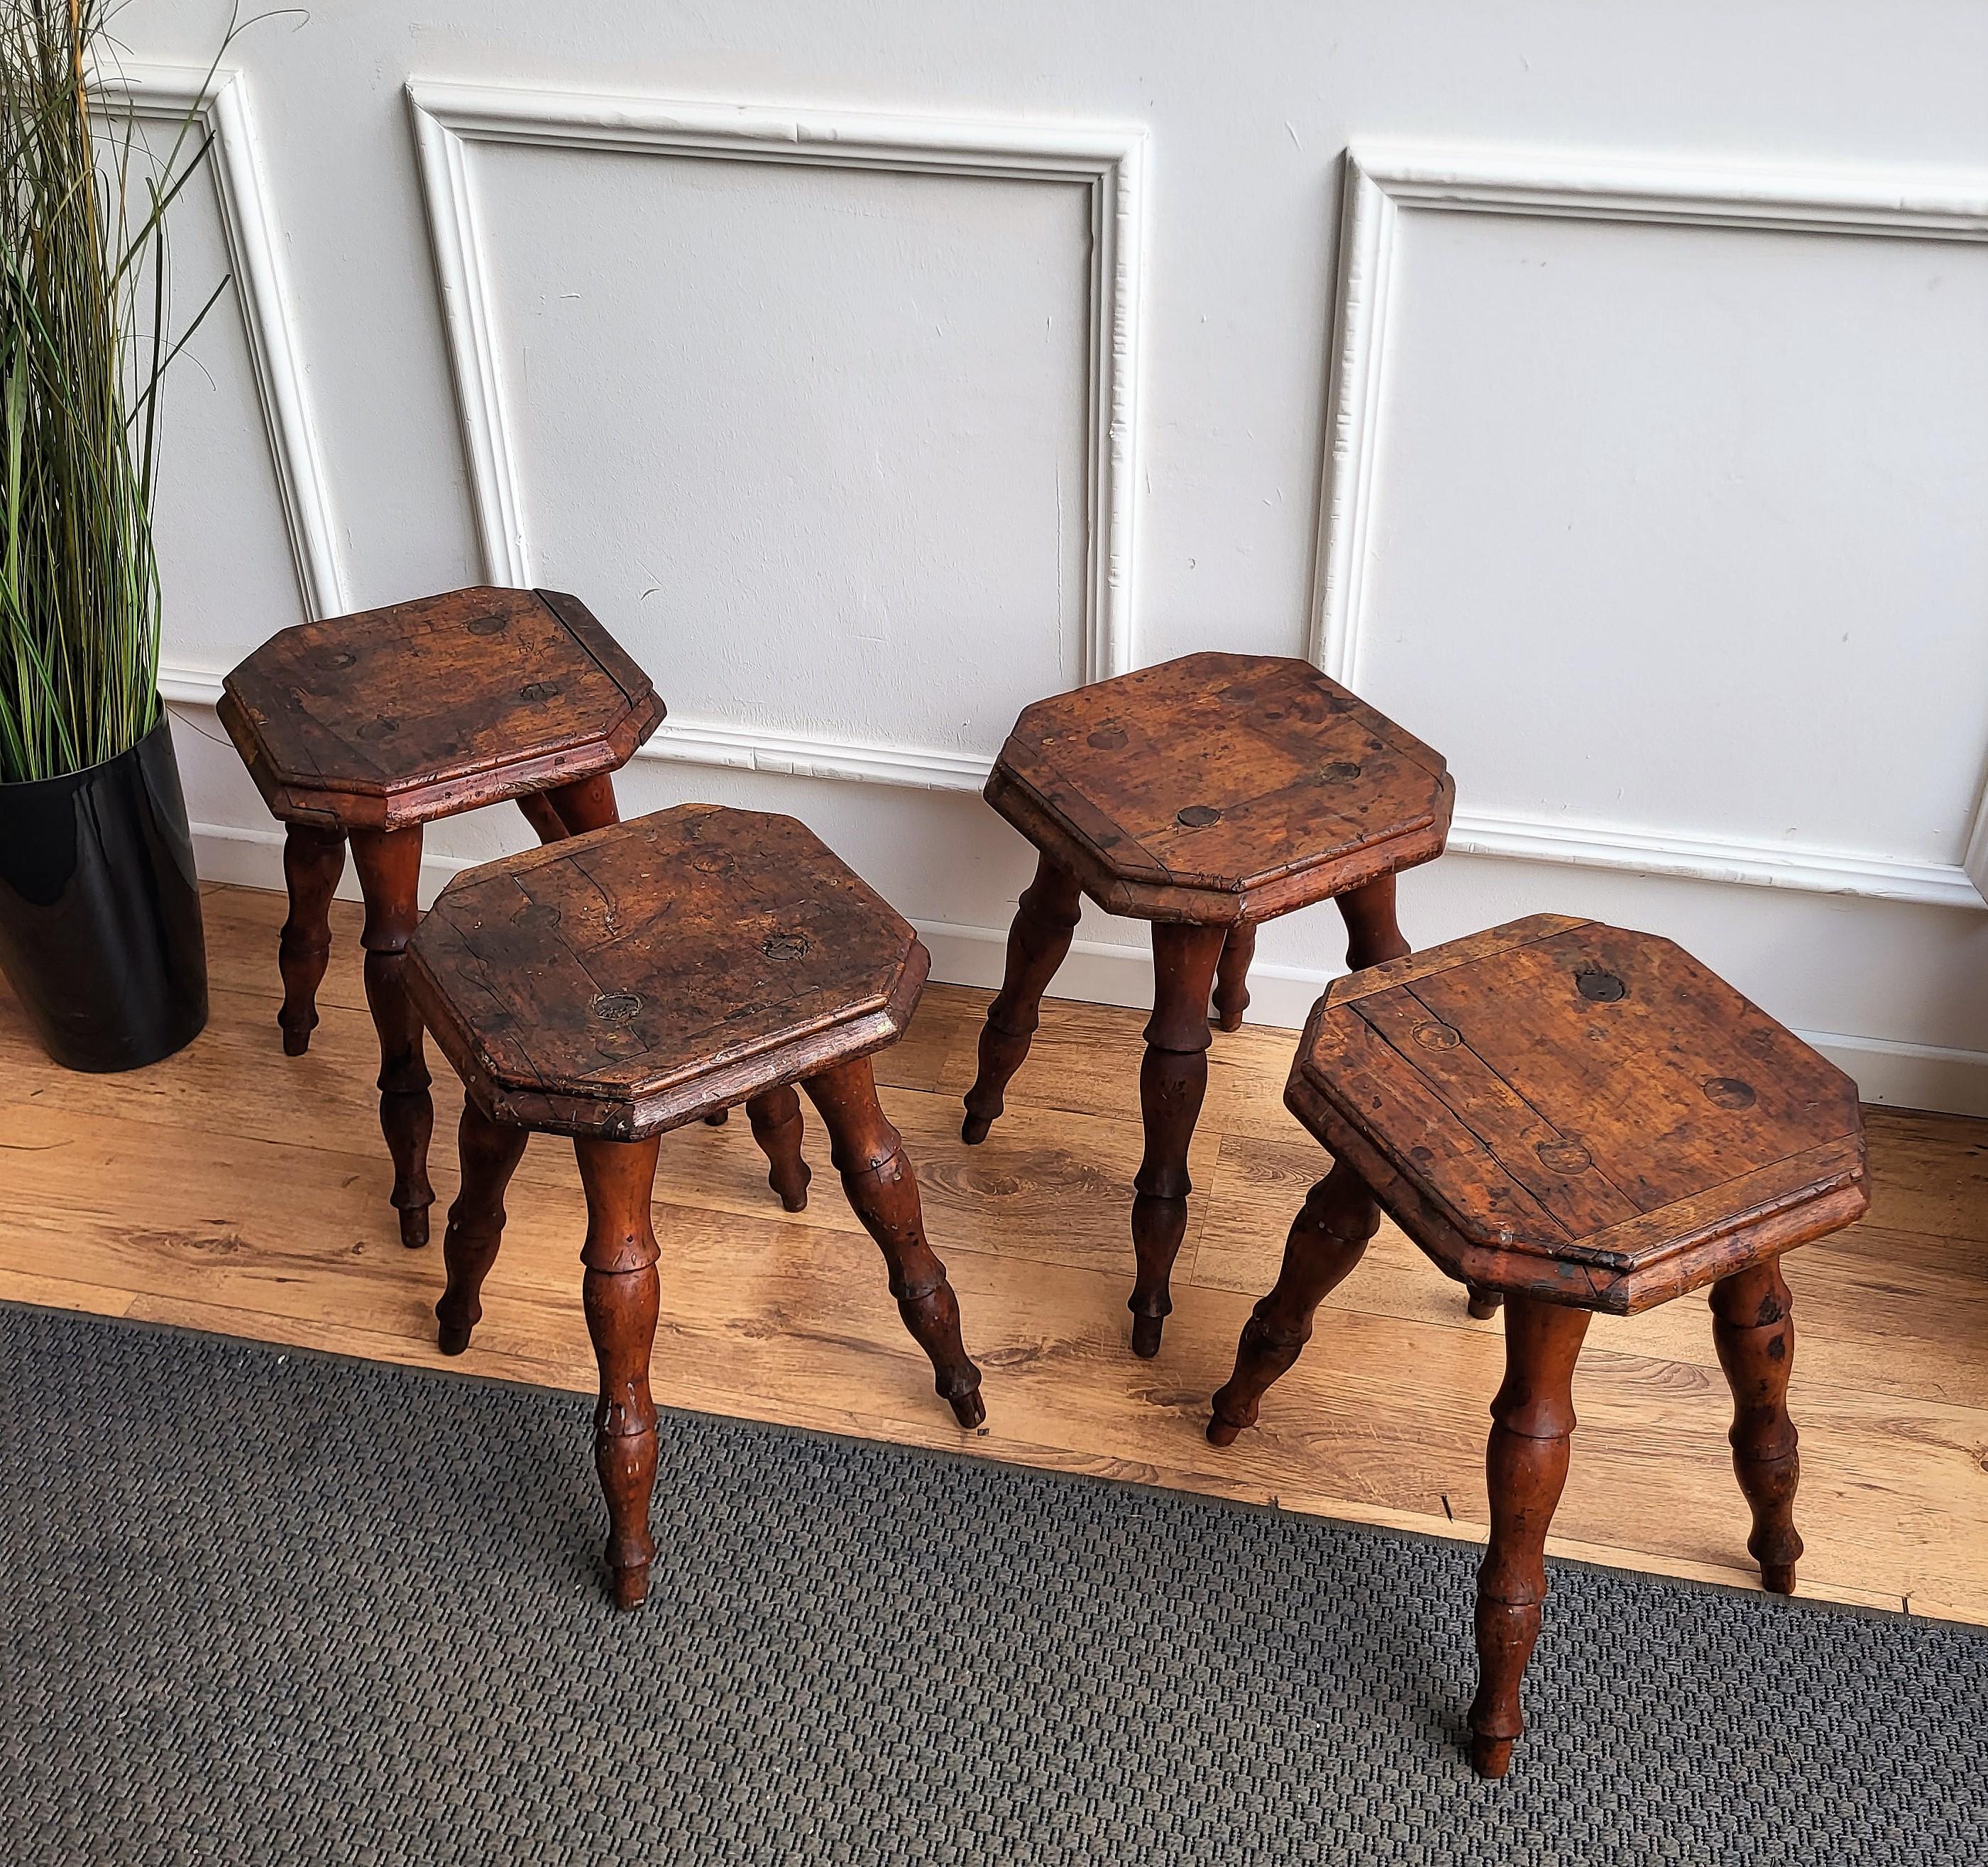 Renaissance Set of 4 Antique Italian Walnut Side Tables or Stools with Carved Turned Legs For Sale